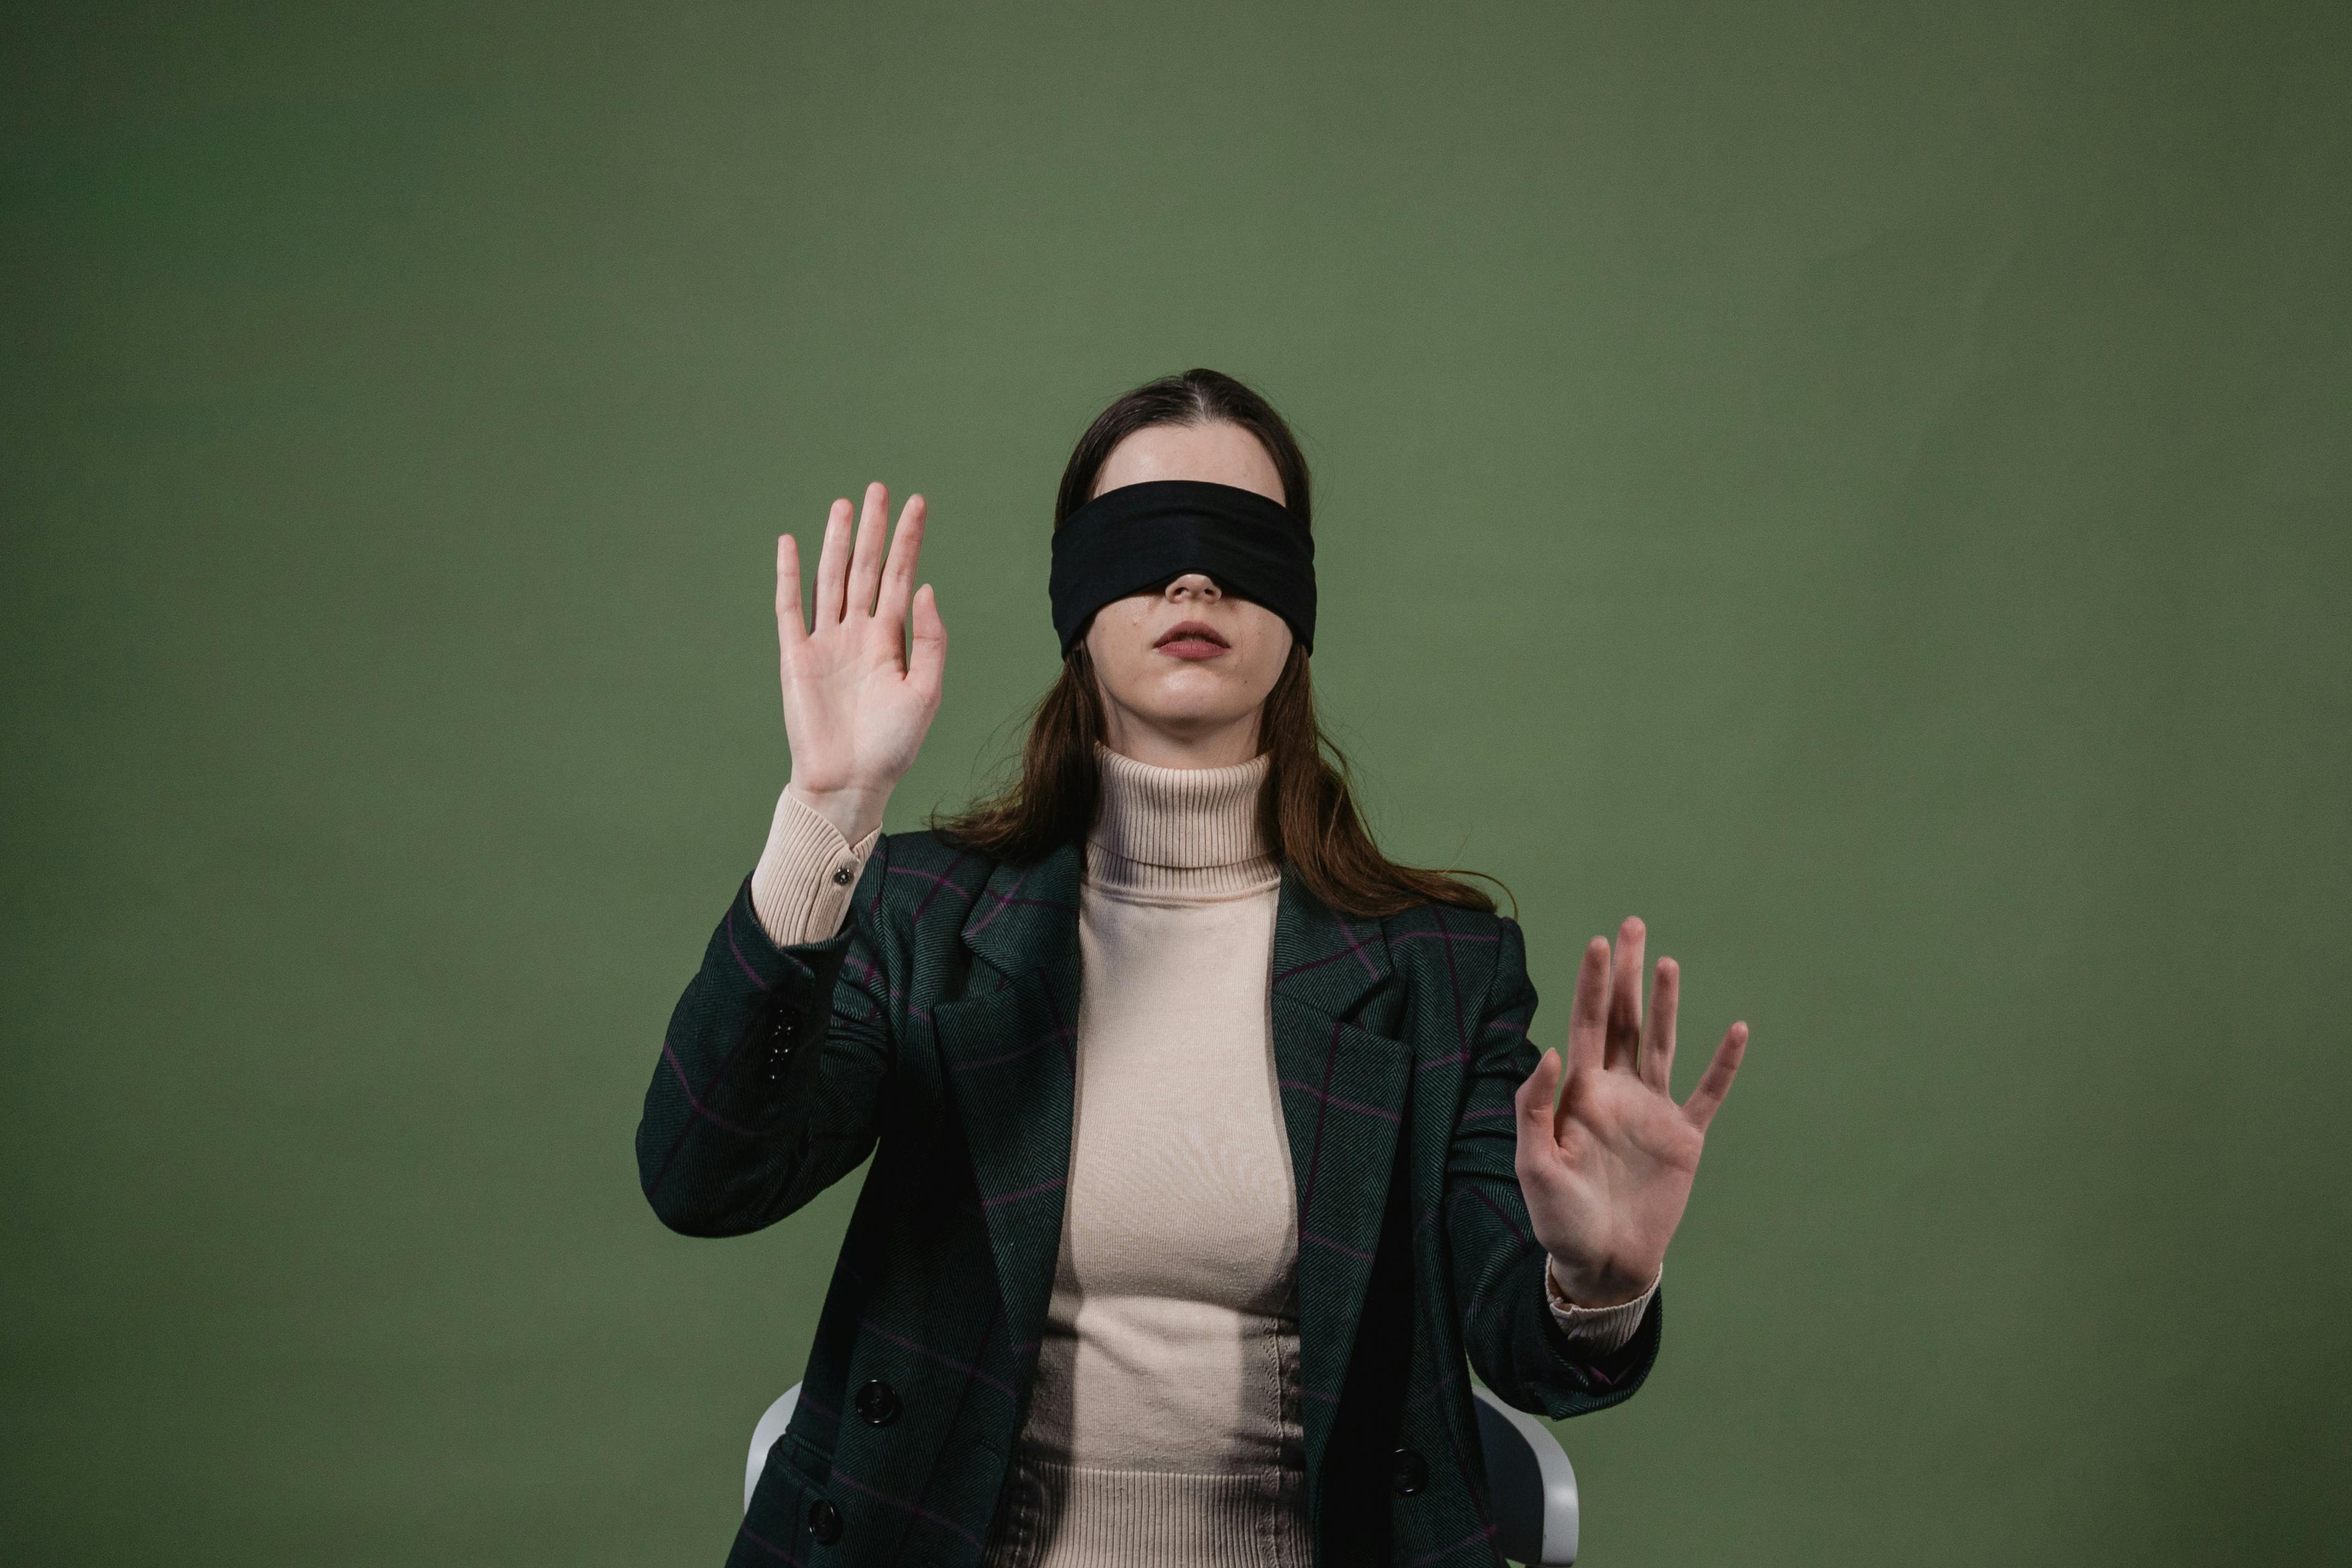 Woman blindfolded, smiling - Stock Image - F003/3209 - Science Photo Library